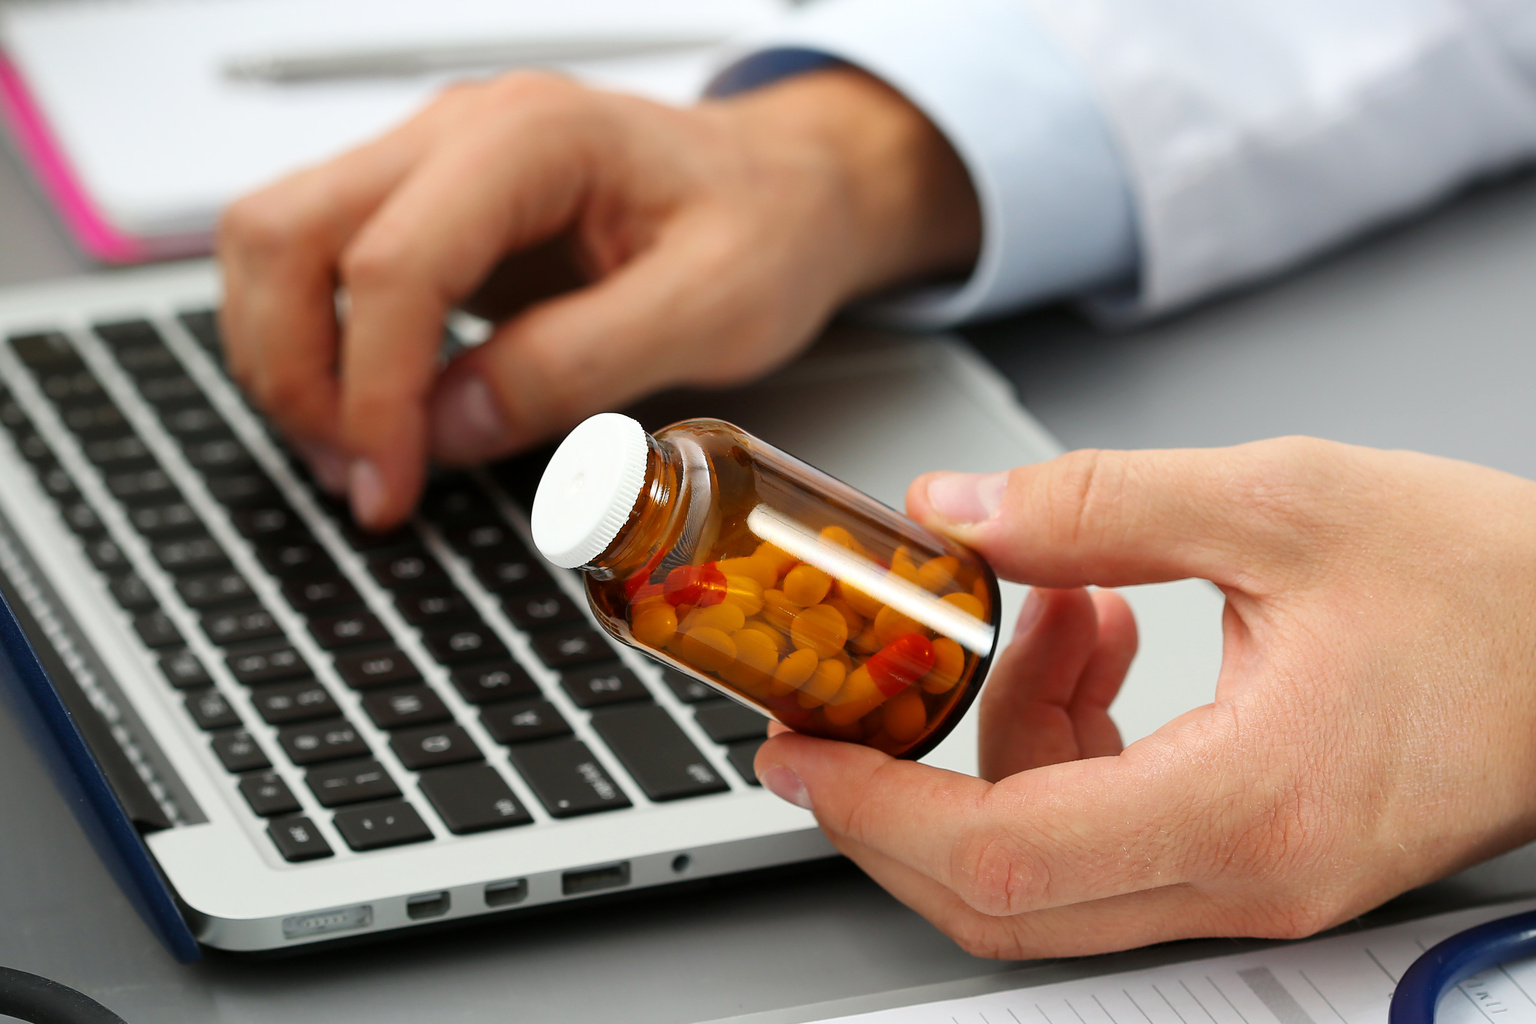 Data solution helps reduce medication errors and relieve pressure on staff